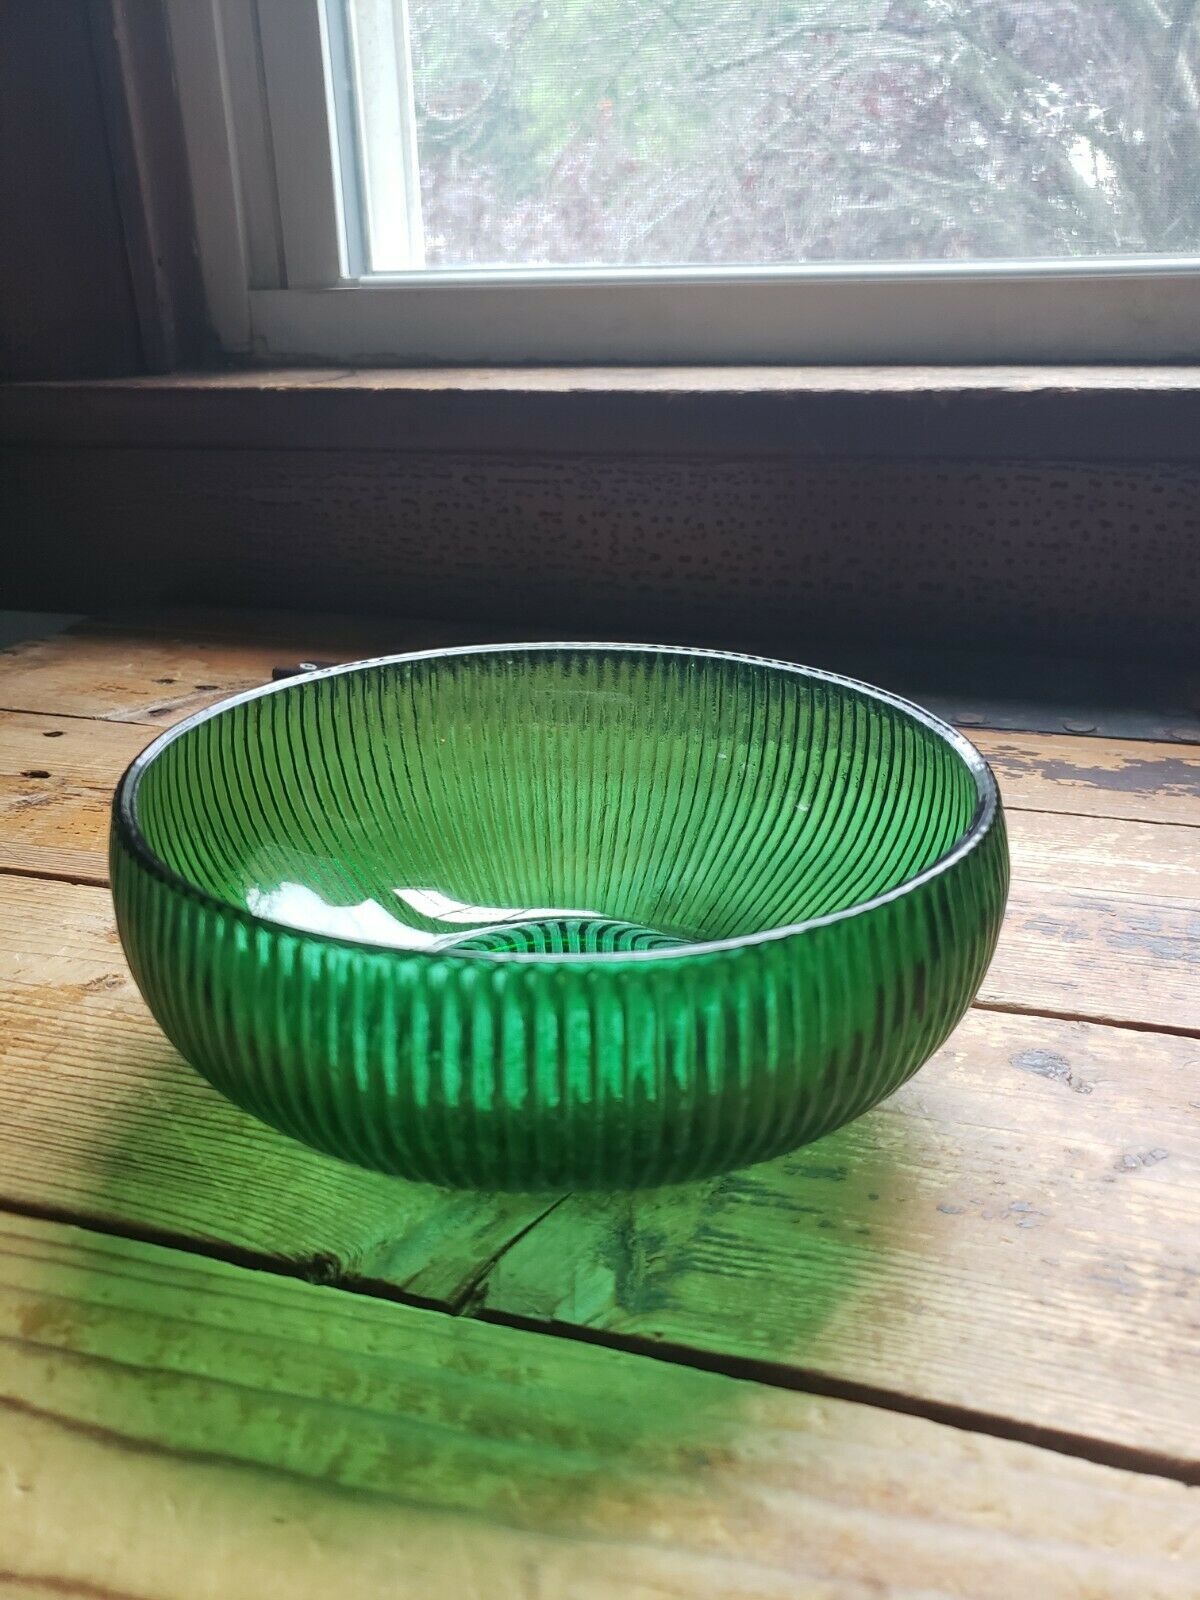 E.o.brody  Co. Green Glass Dish, Excellent Condition; 6.5 Inches Diameter